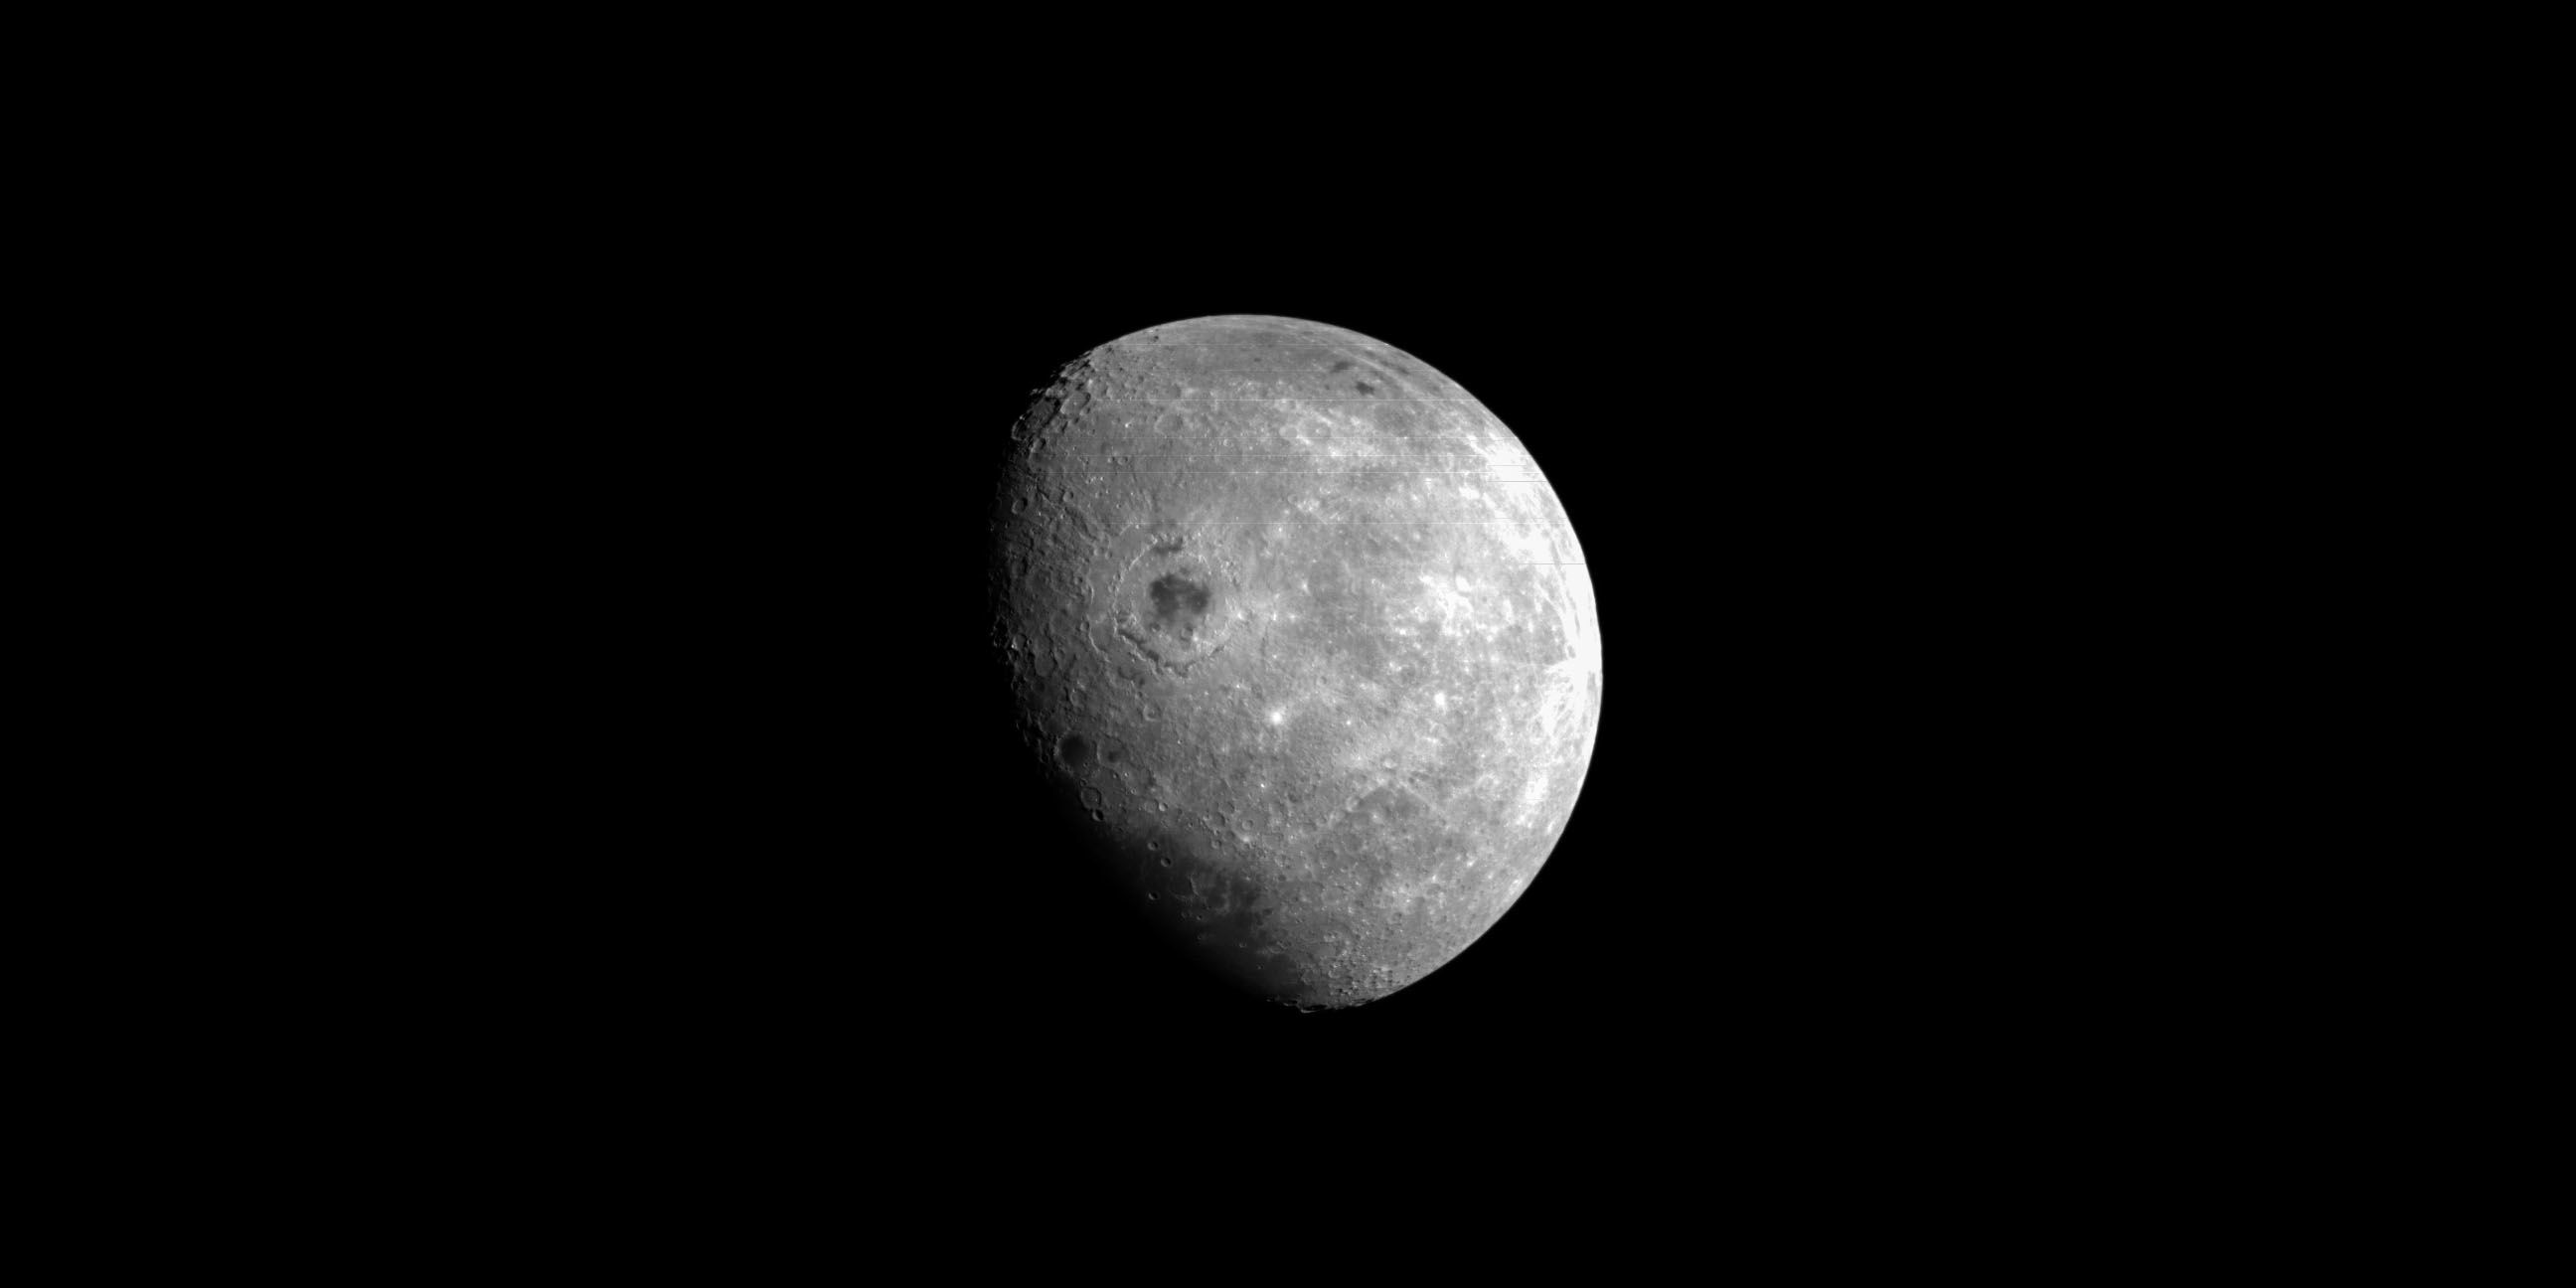 An image from the Orion spacecraft of the far side of the Moon.